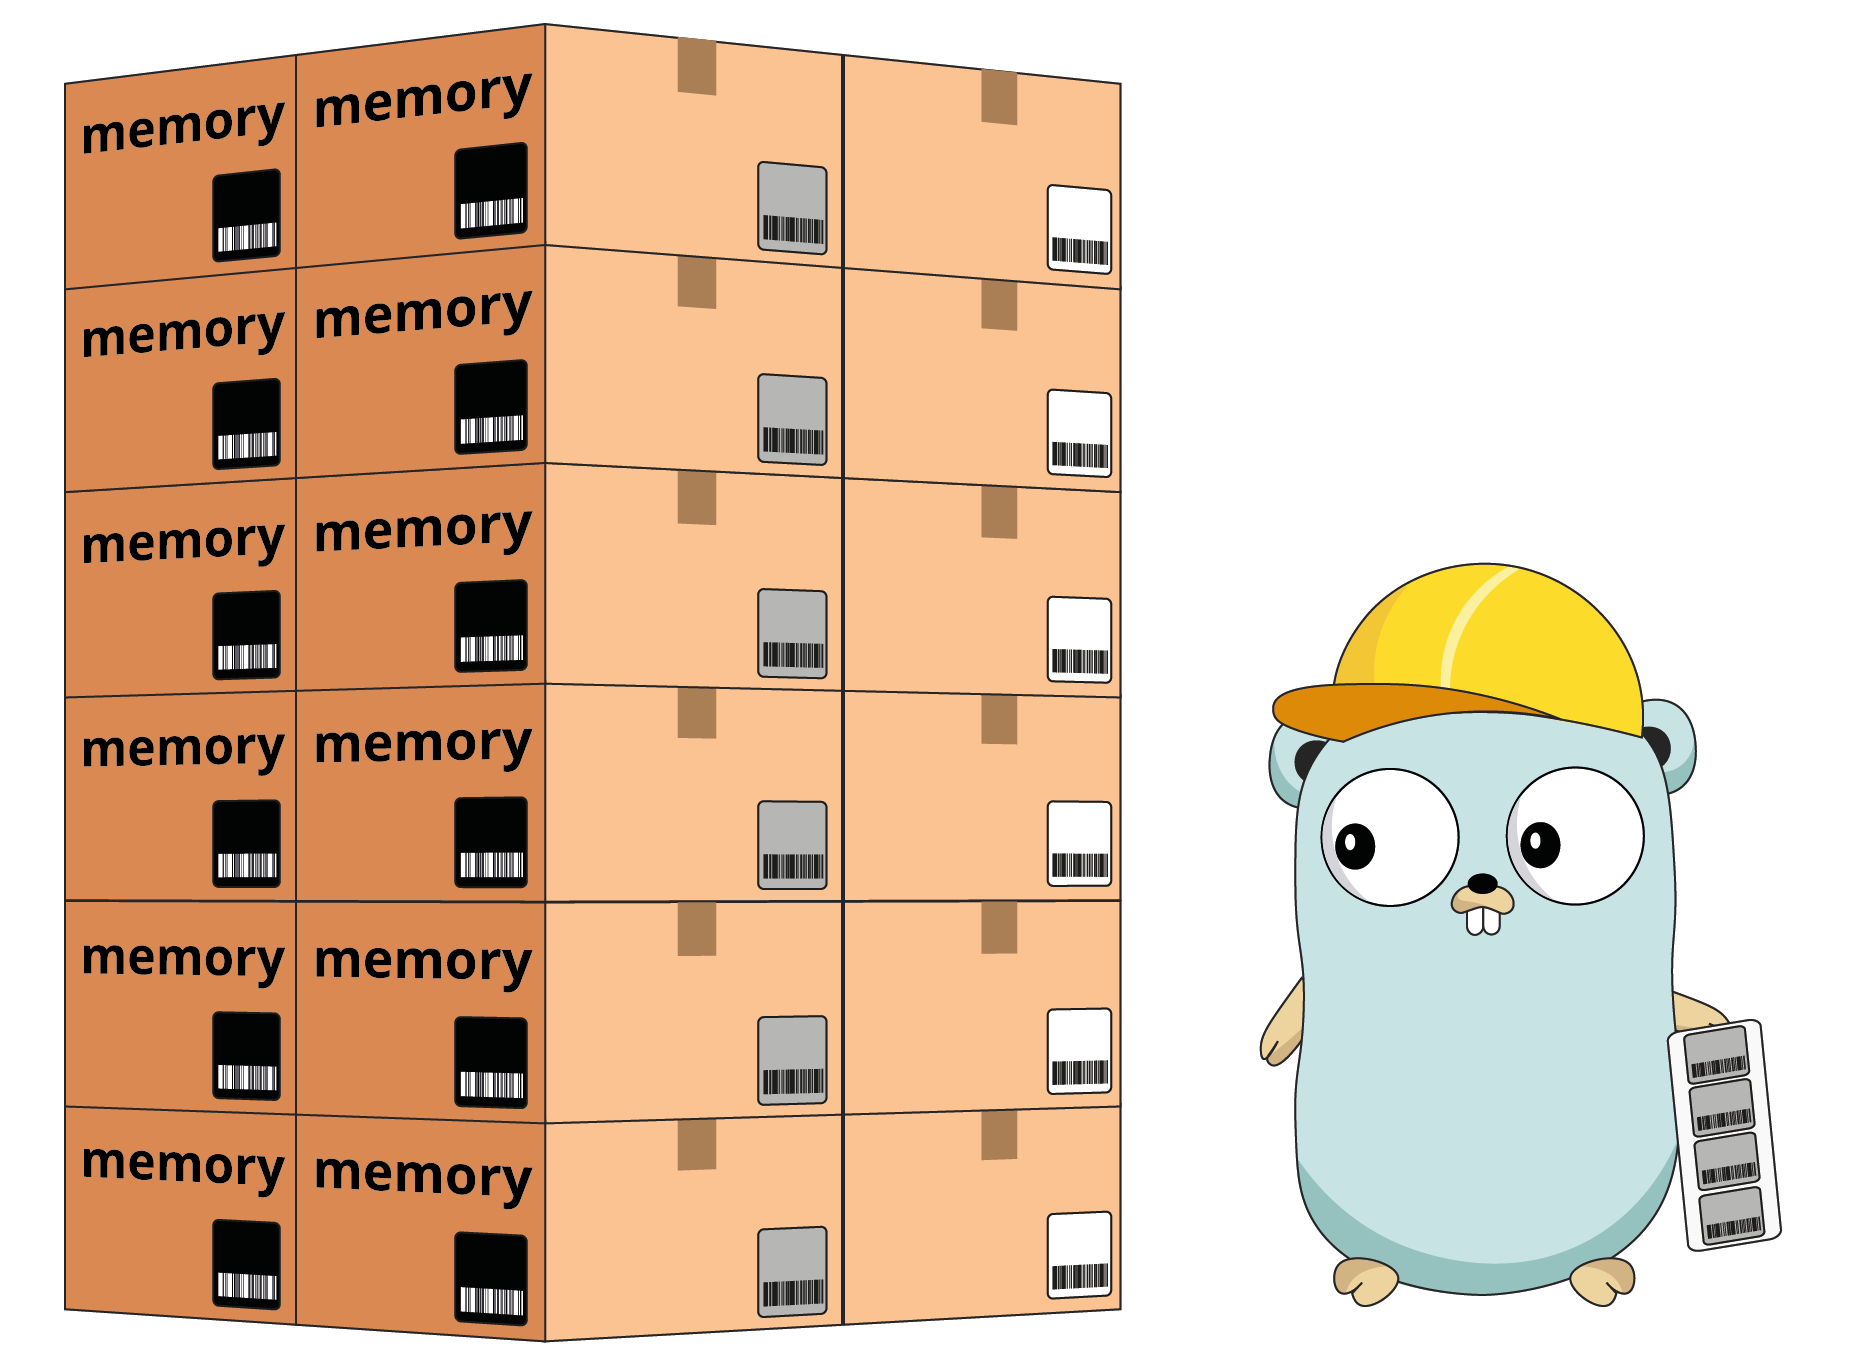 Illustration created for “A Journey With Go”, made from the original Go Gopher, created by Renee French